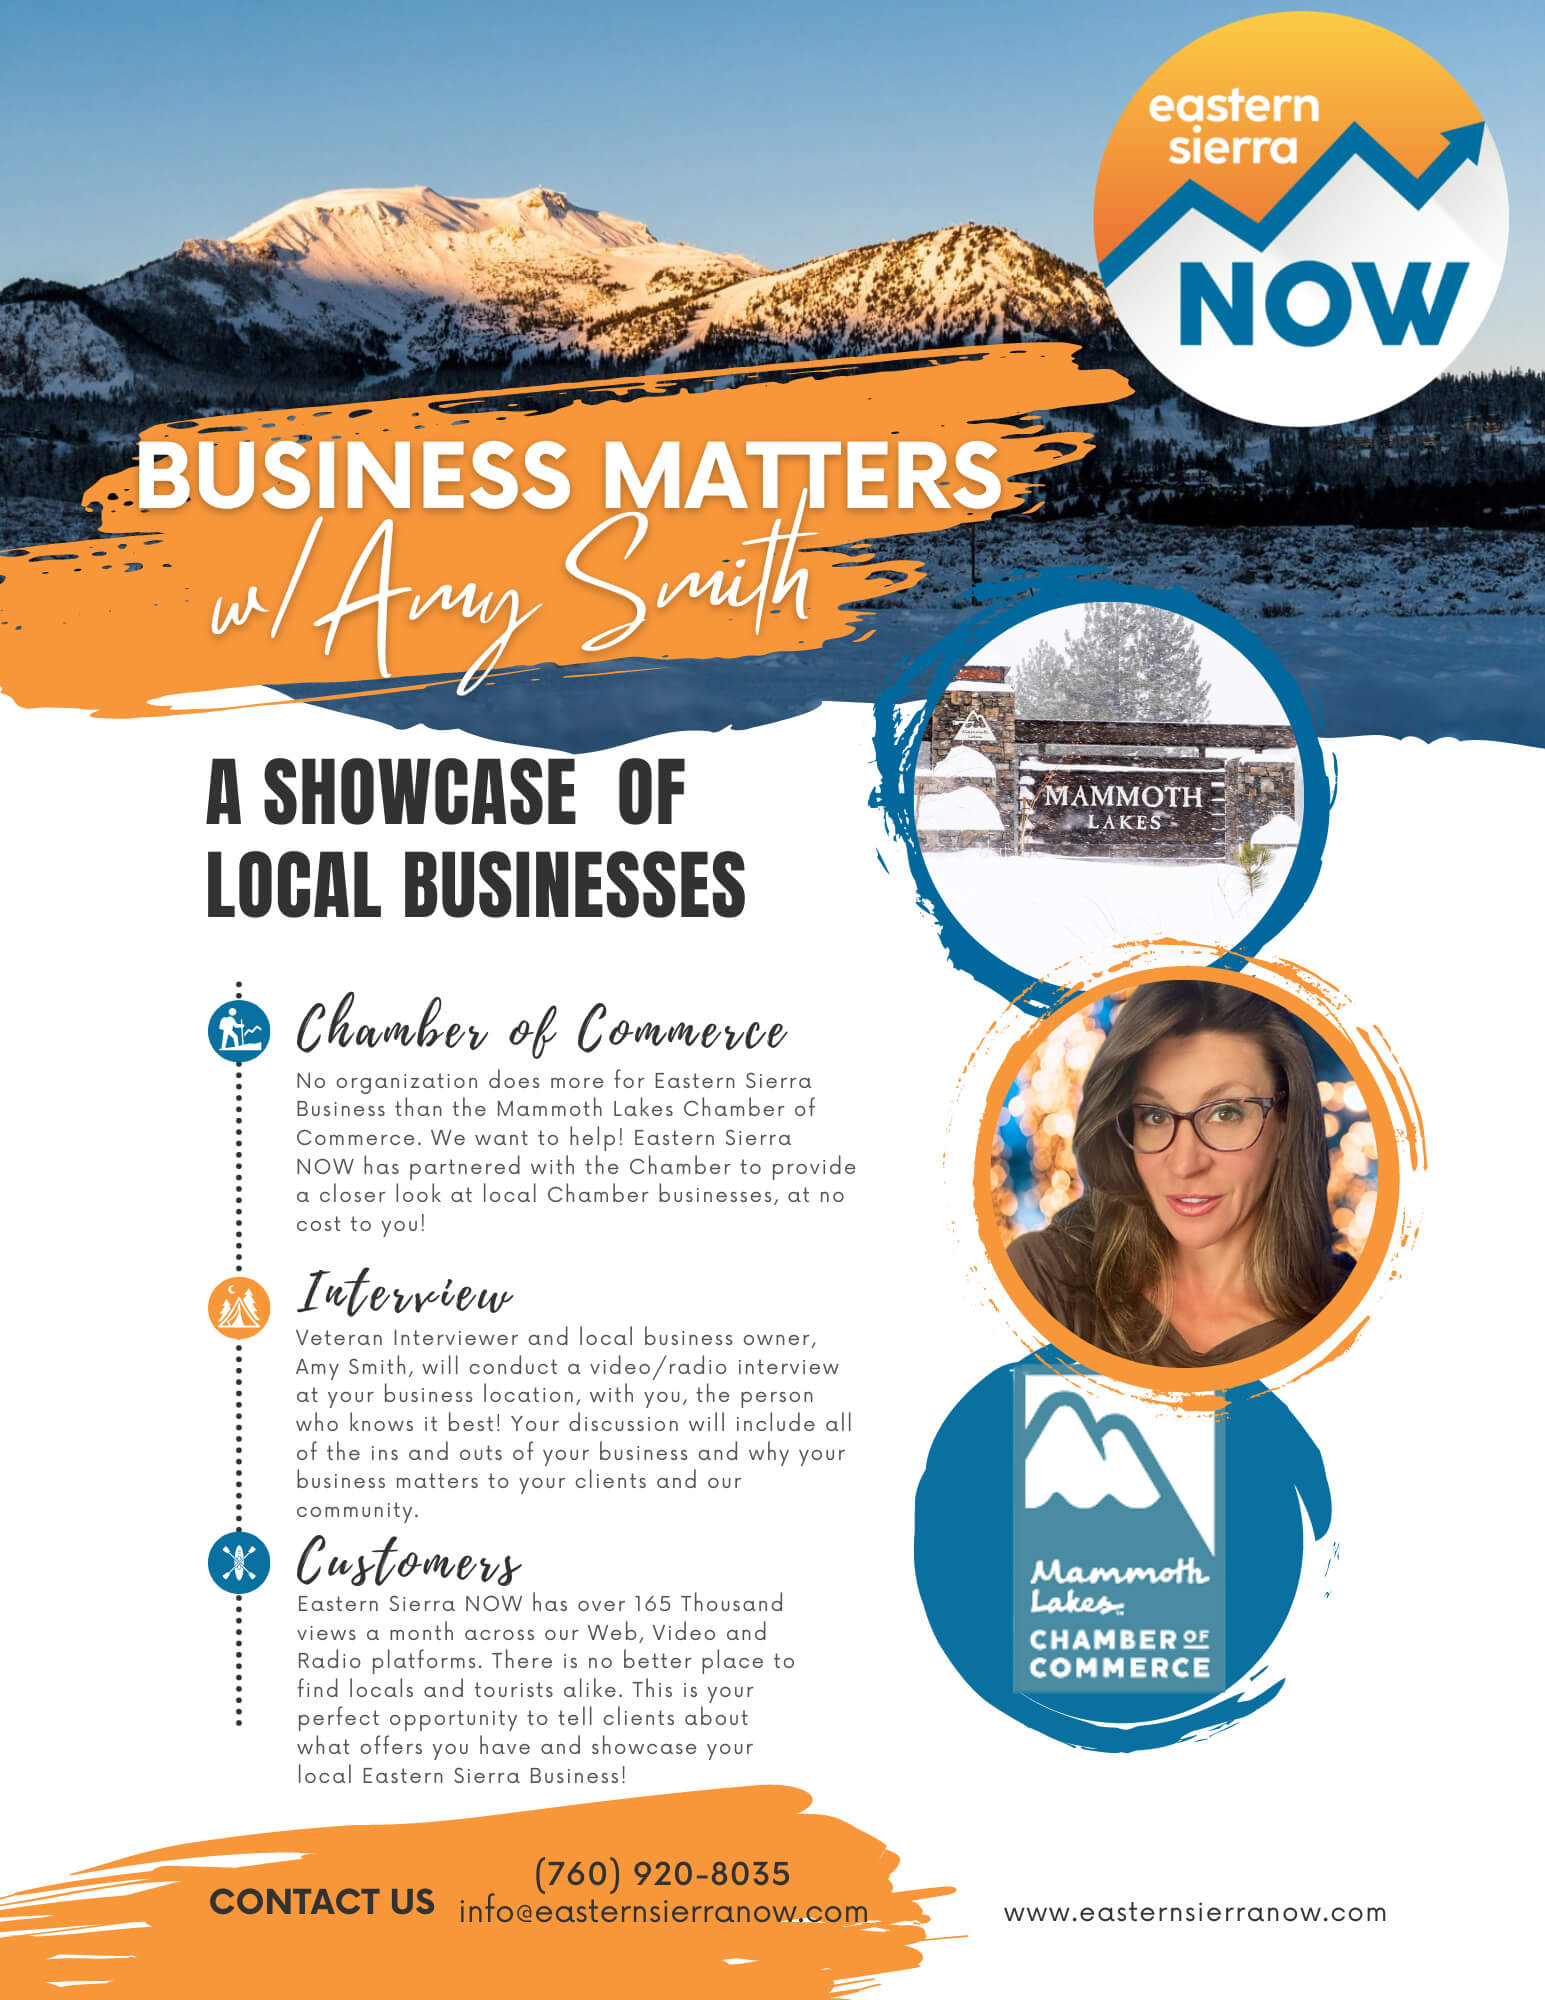 A flyer with info about the Business Matters program with Eastern Sierra NOW, contact the Chamber for more info